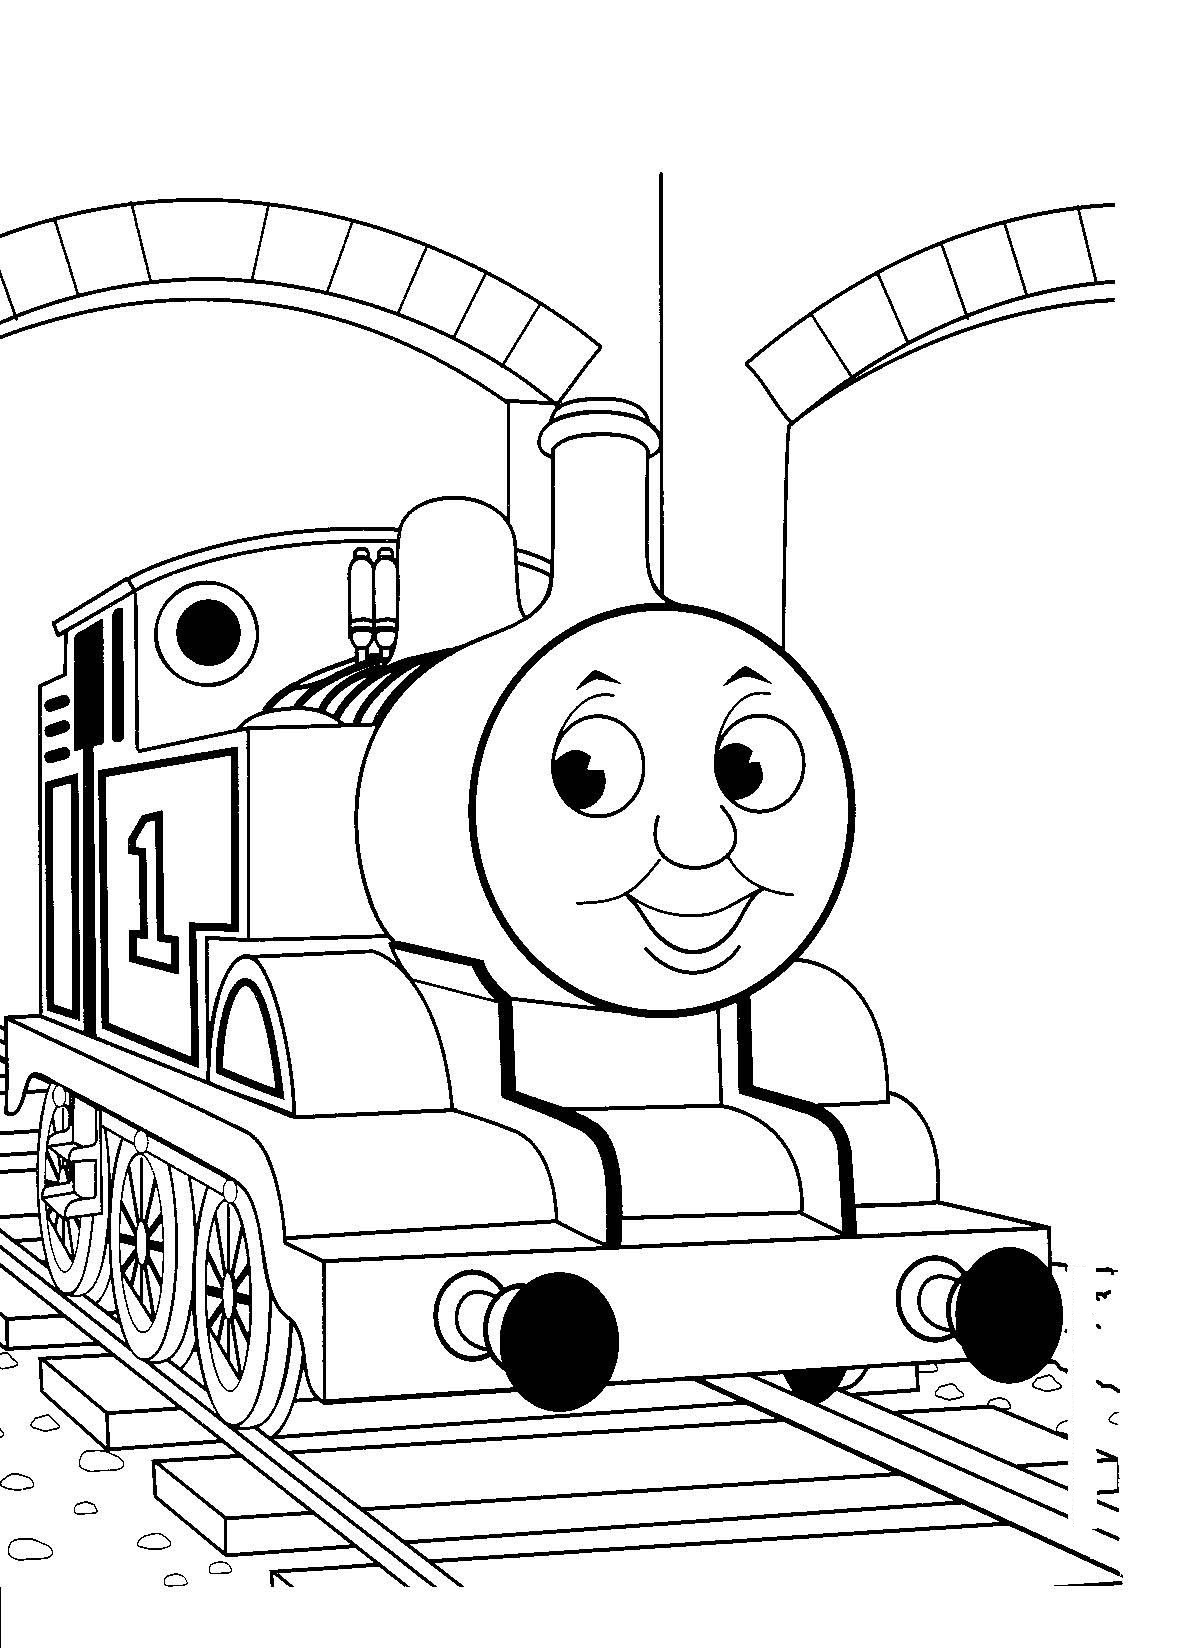 childs colouring book cover with train and aniamls on the train in colour